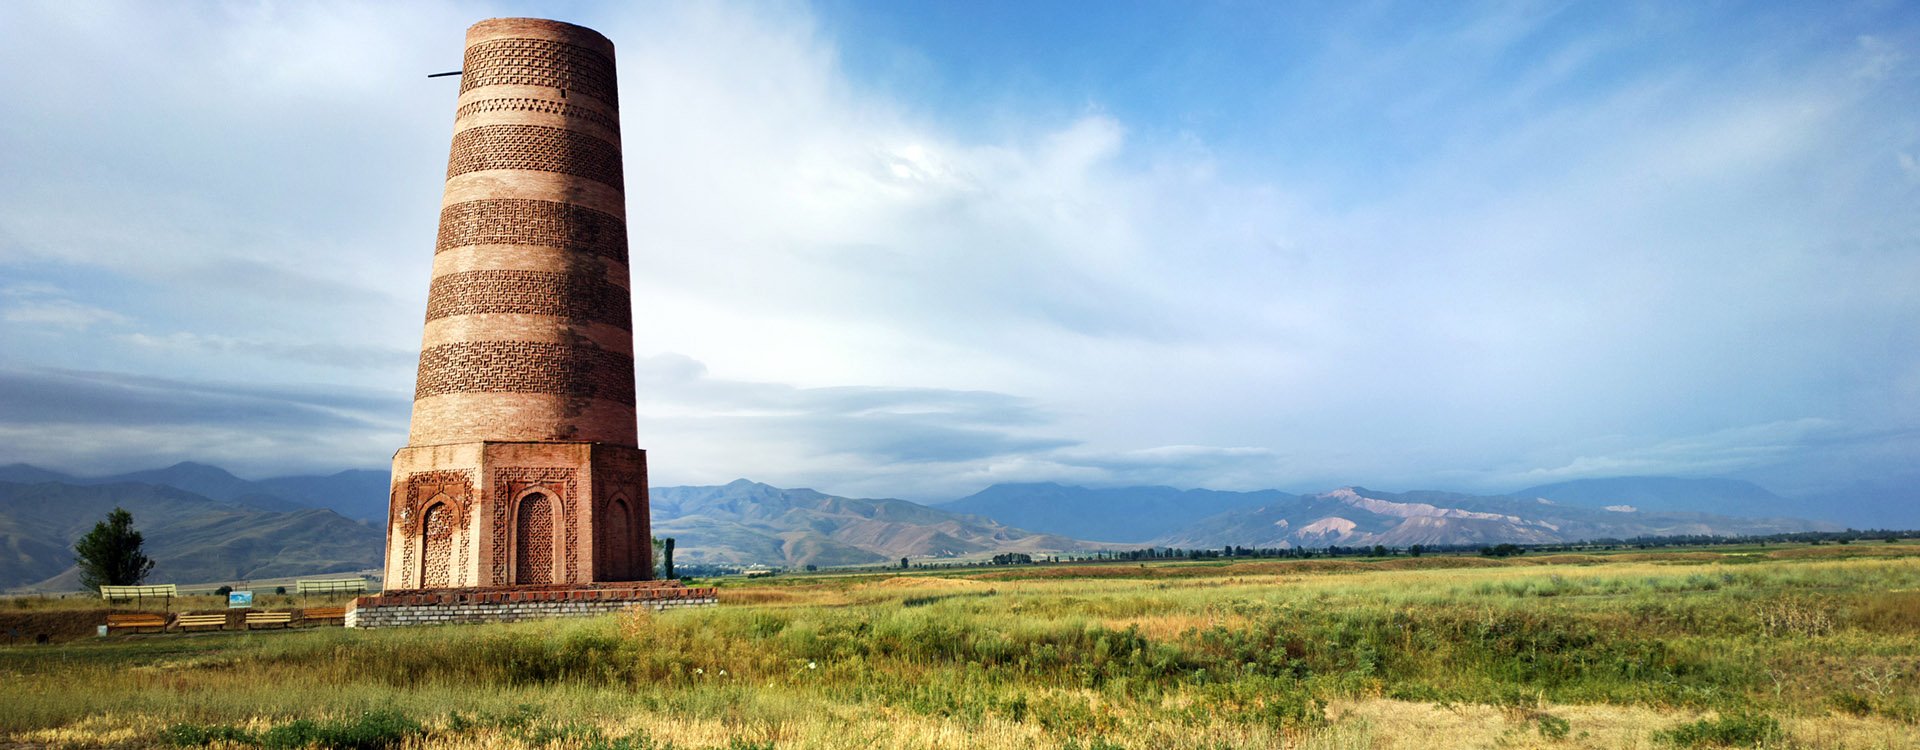 Old Burana tower located on famous Silk road, Kyrgyzstan